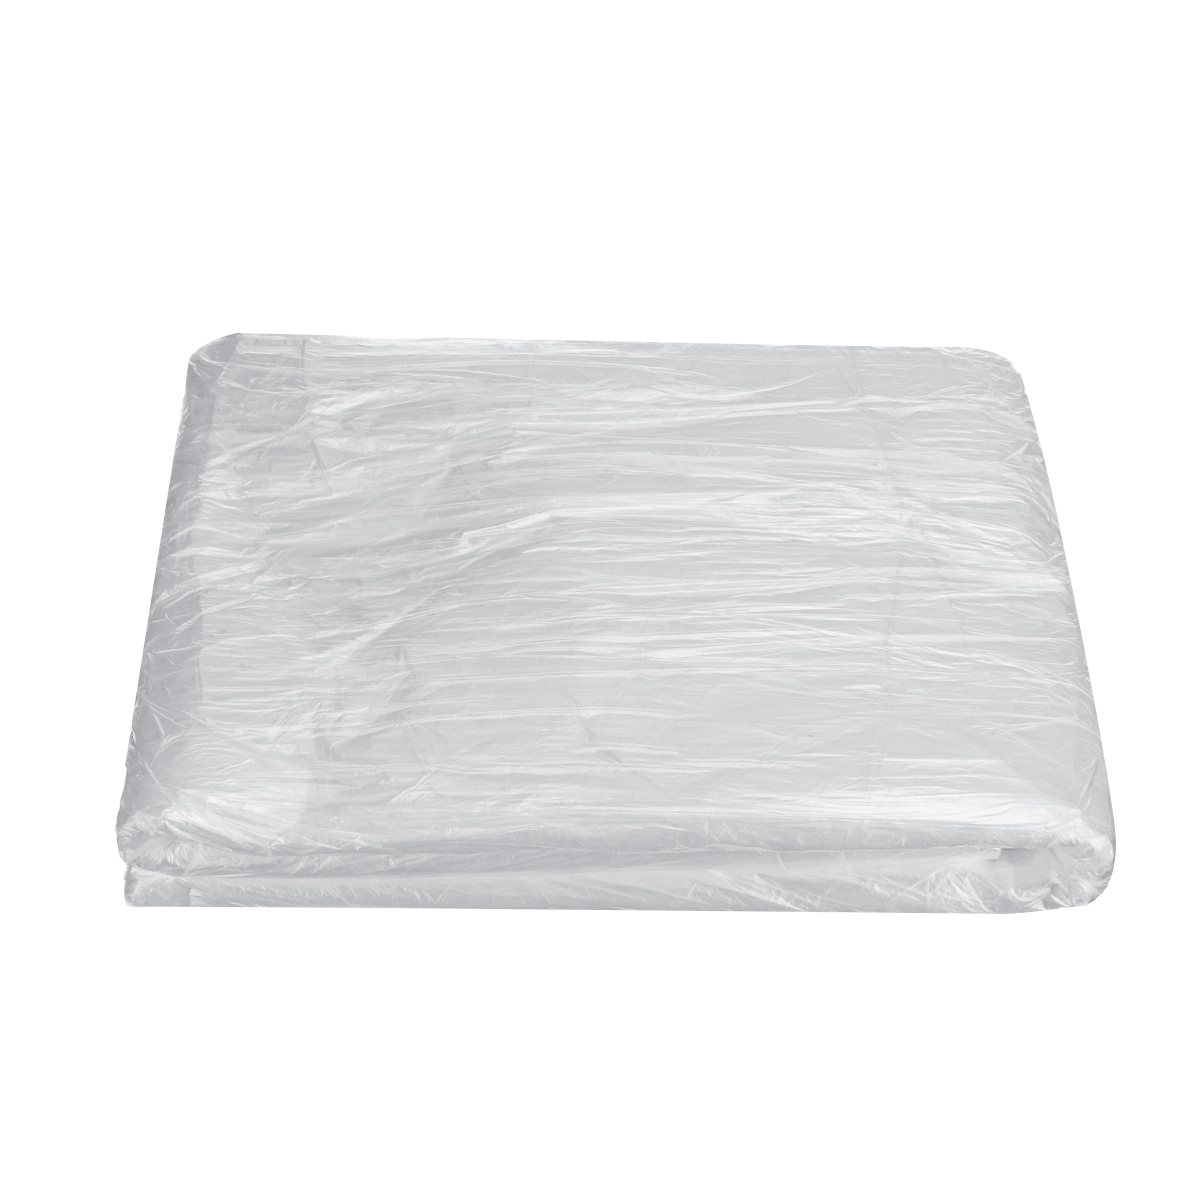 100pcs-Couch-Cover-For-Massage-Tables-Bed-Beauty-Treatment-Waxing-Protection-1689590-3